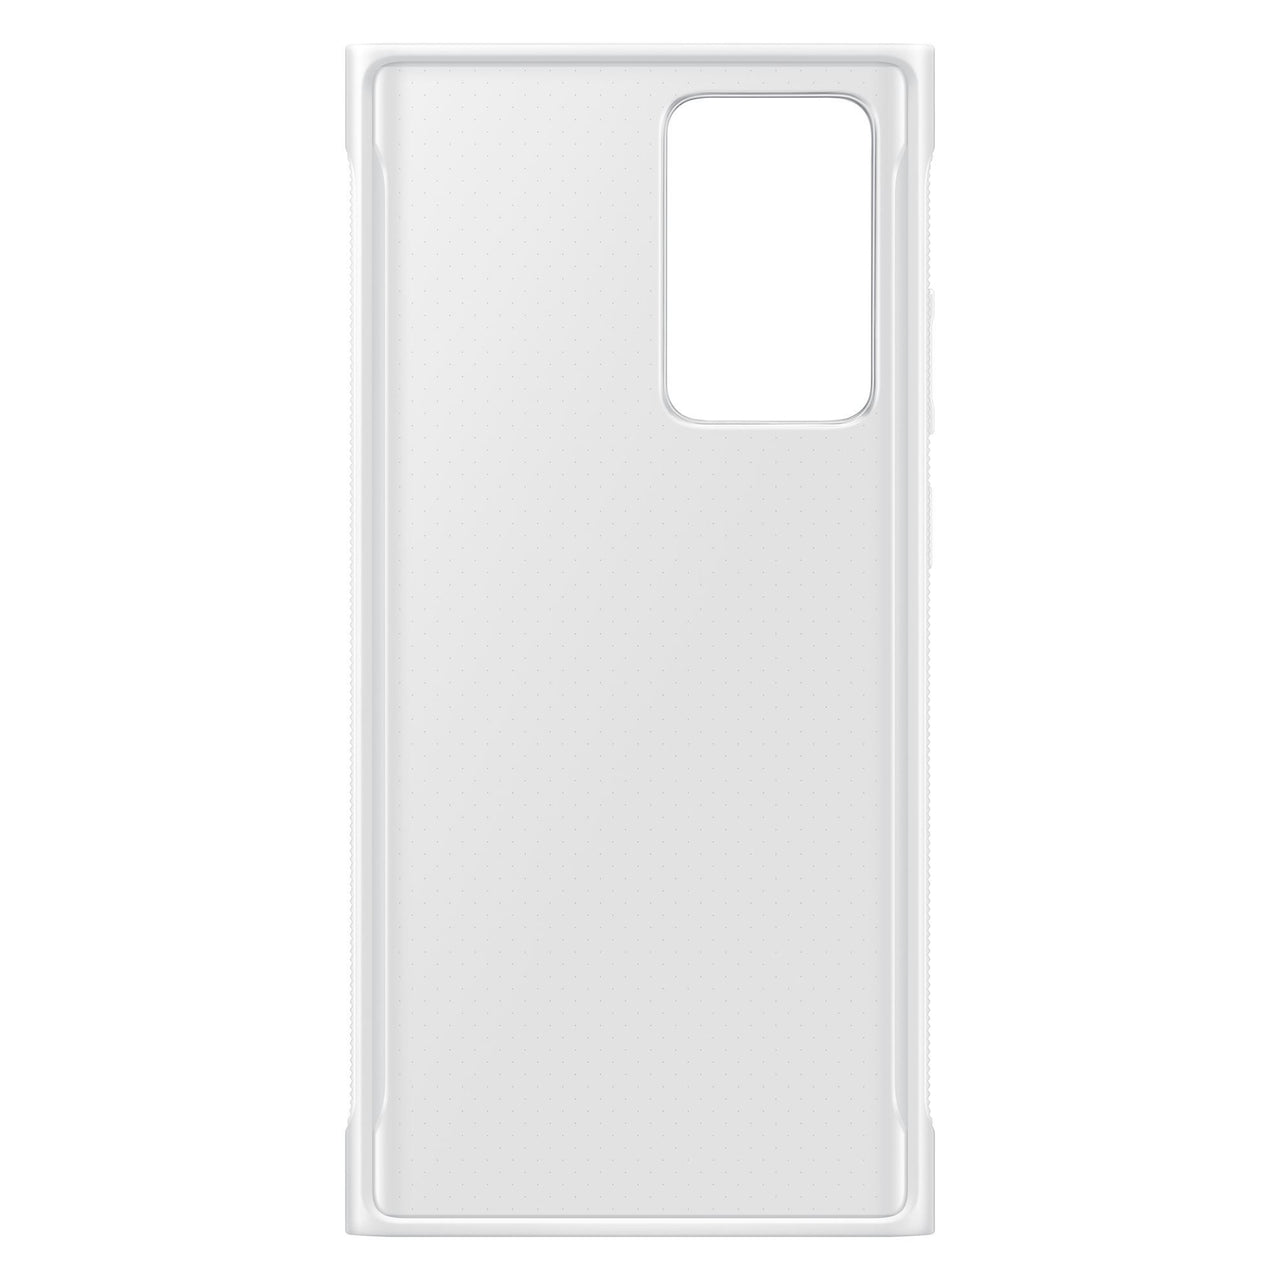 Samsung Protective Cover with Stand For Galaxy Note20 Ultra - White